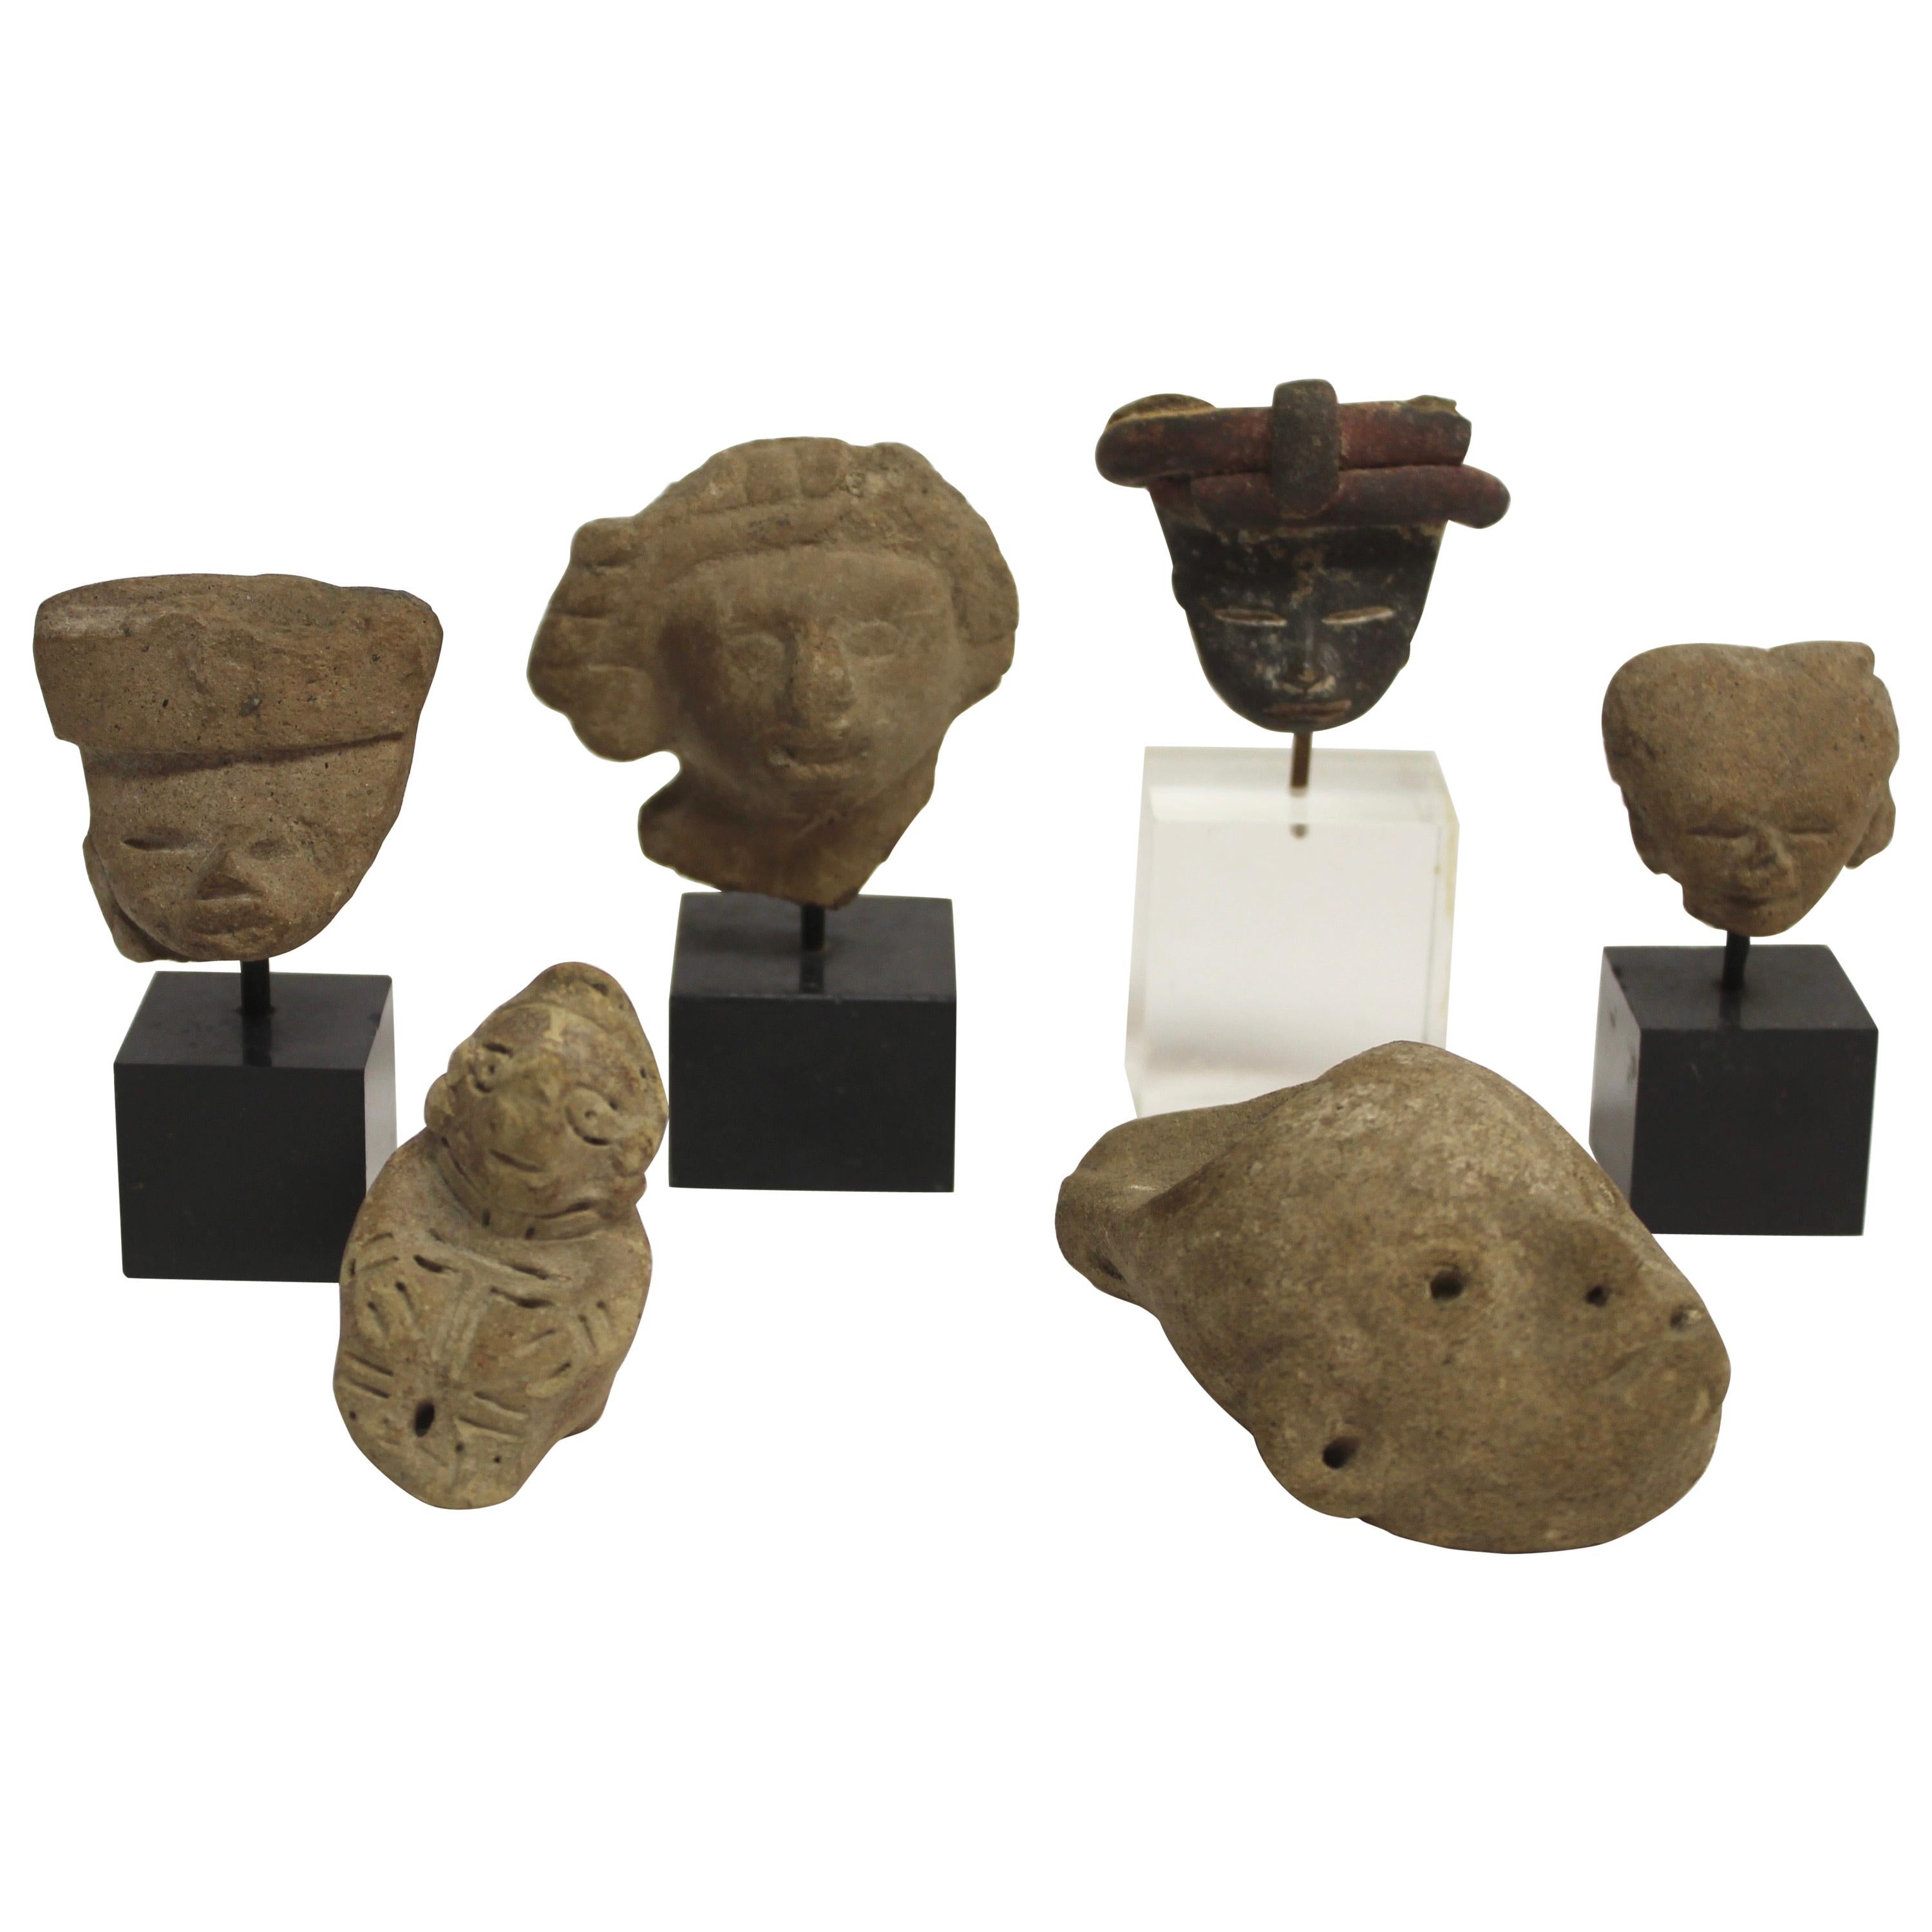 Collection of Six Precolumbian Pottery Figures